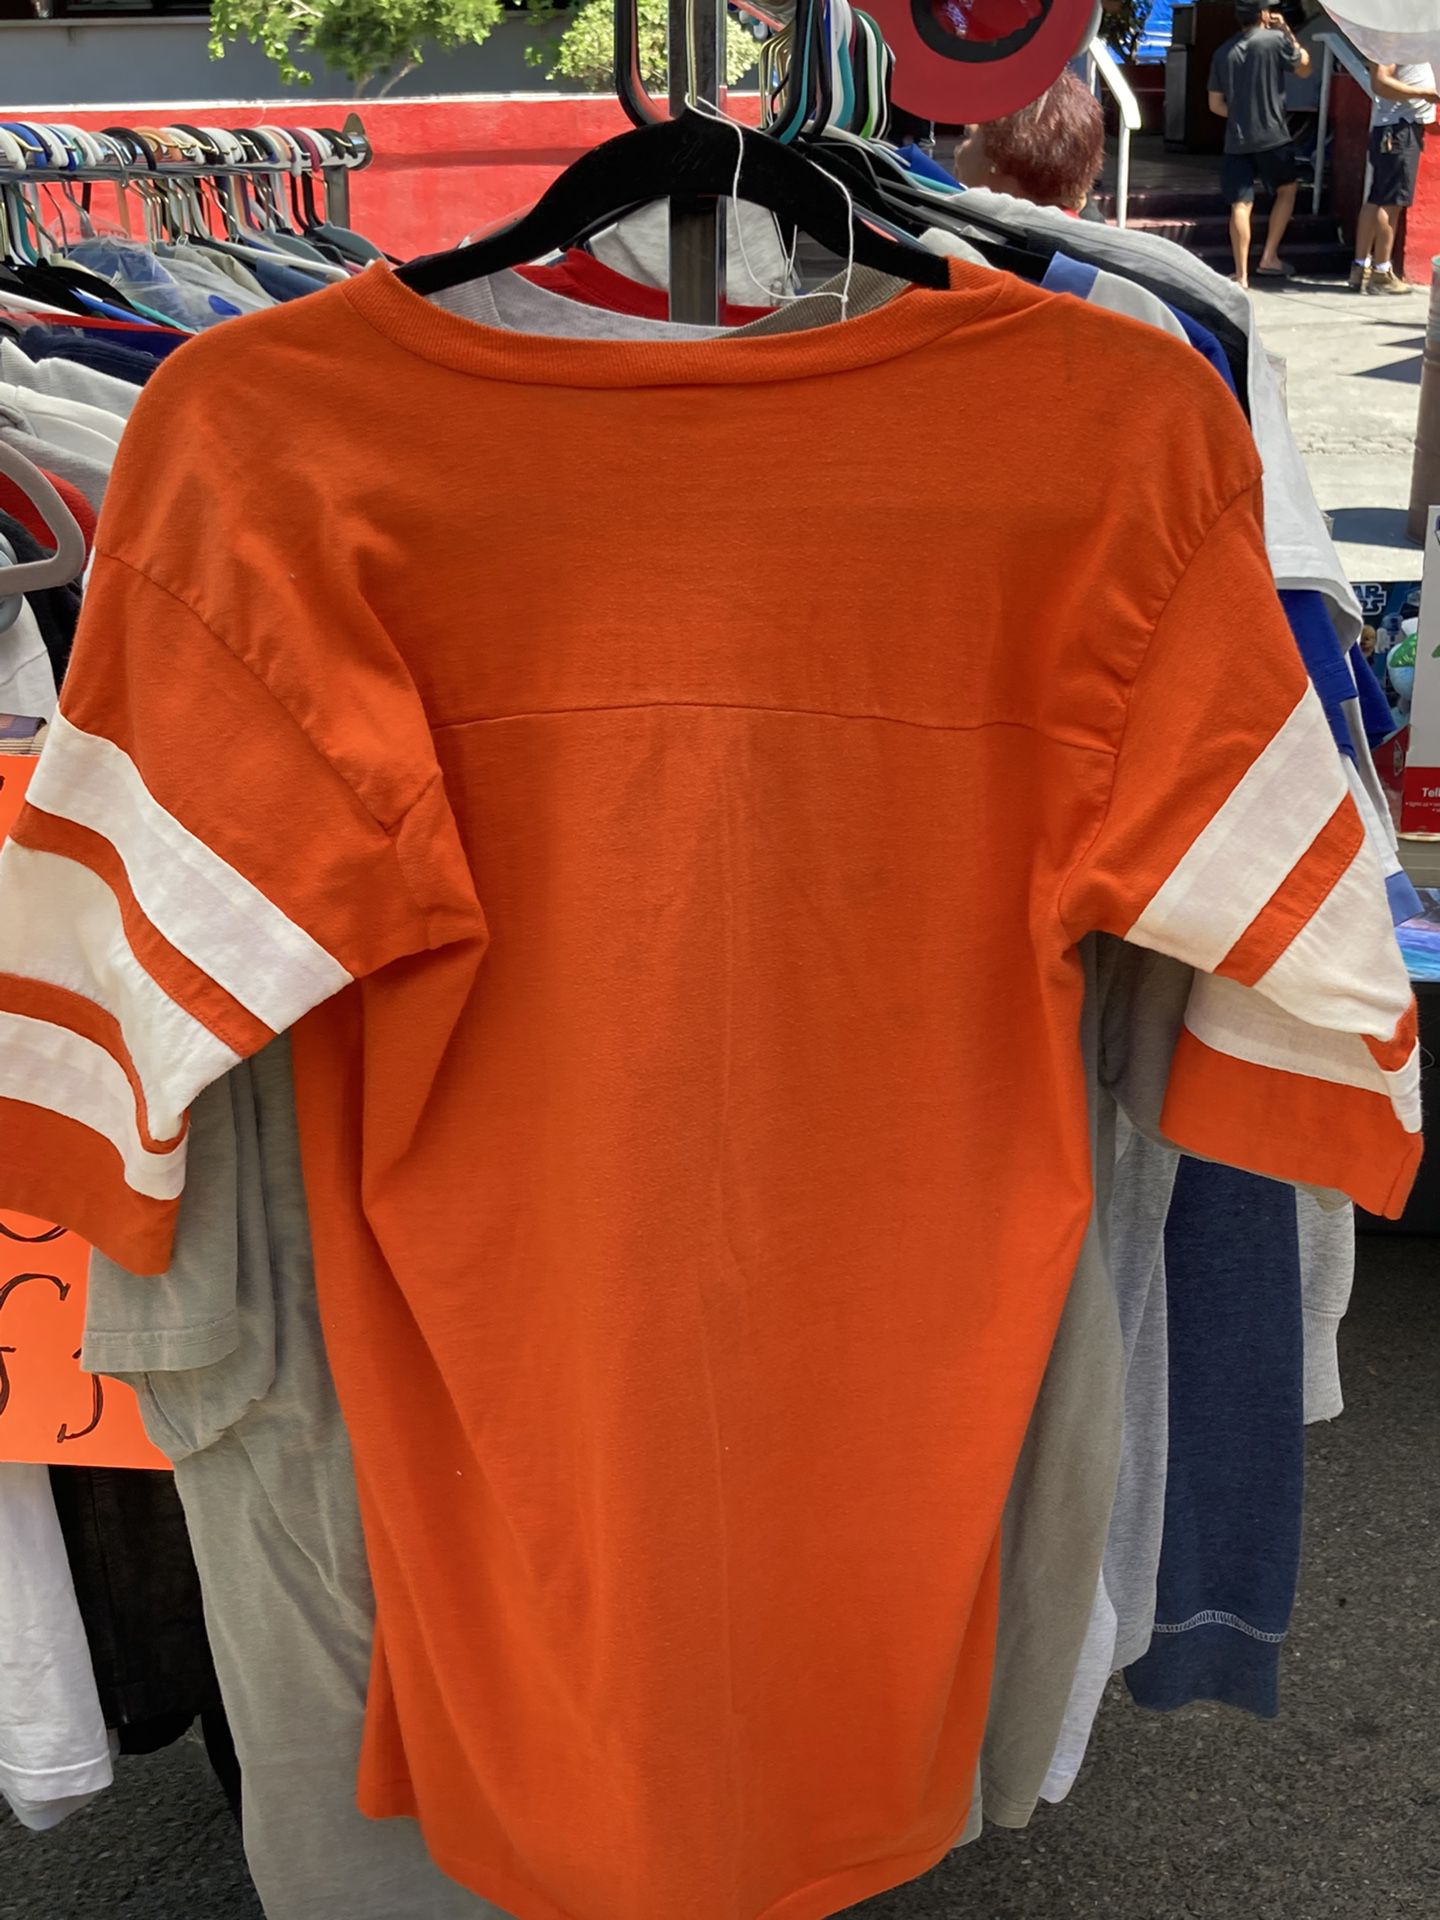 Vintage Miami Hurricanes Shirt Lot for Sale in Miami, FL - OfferUp